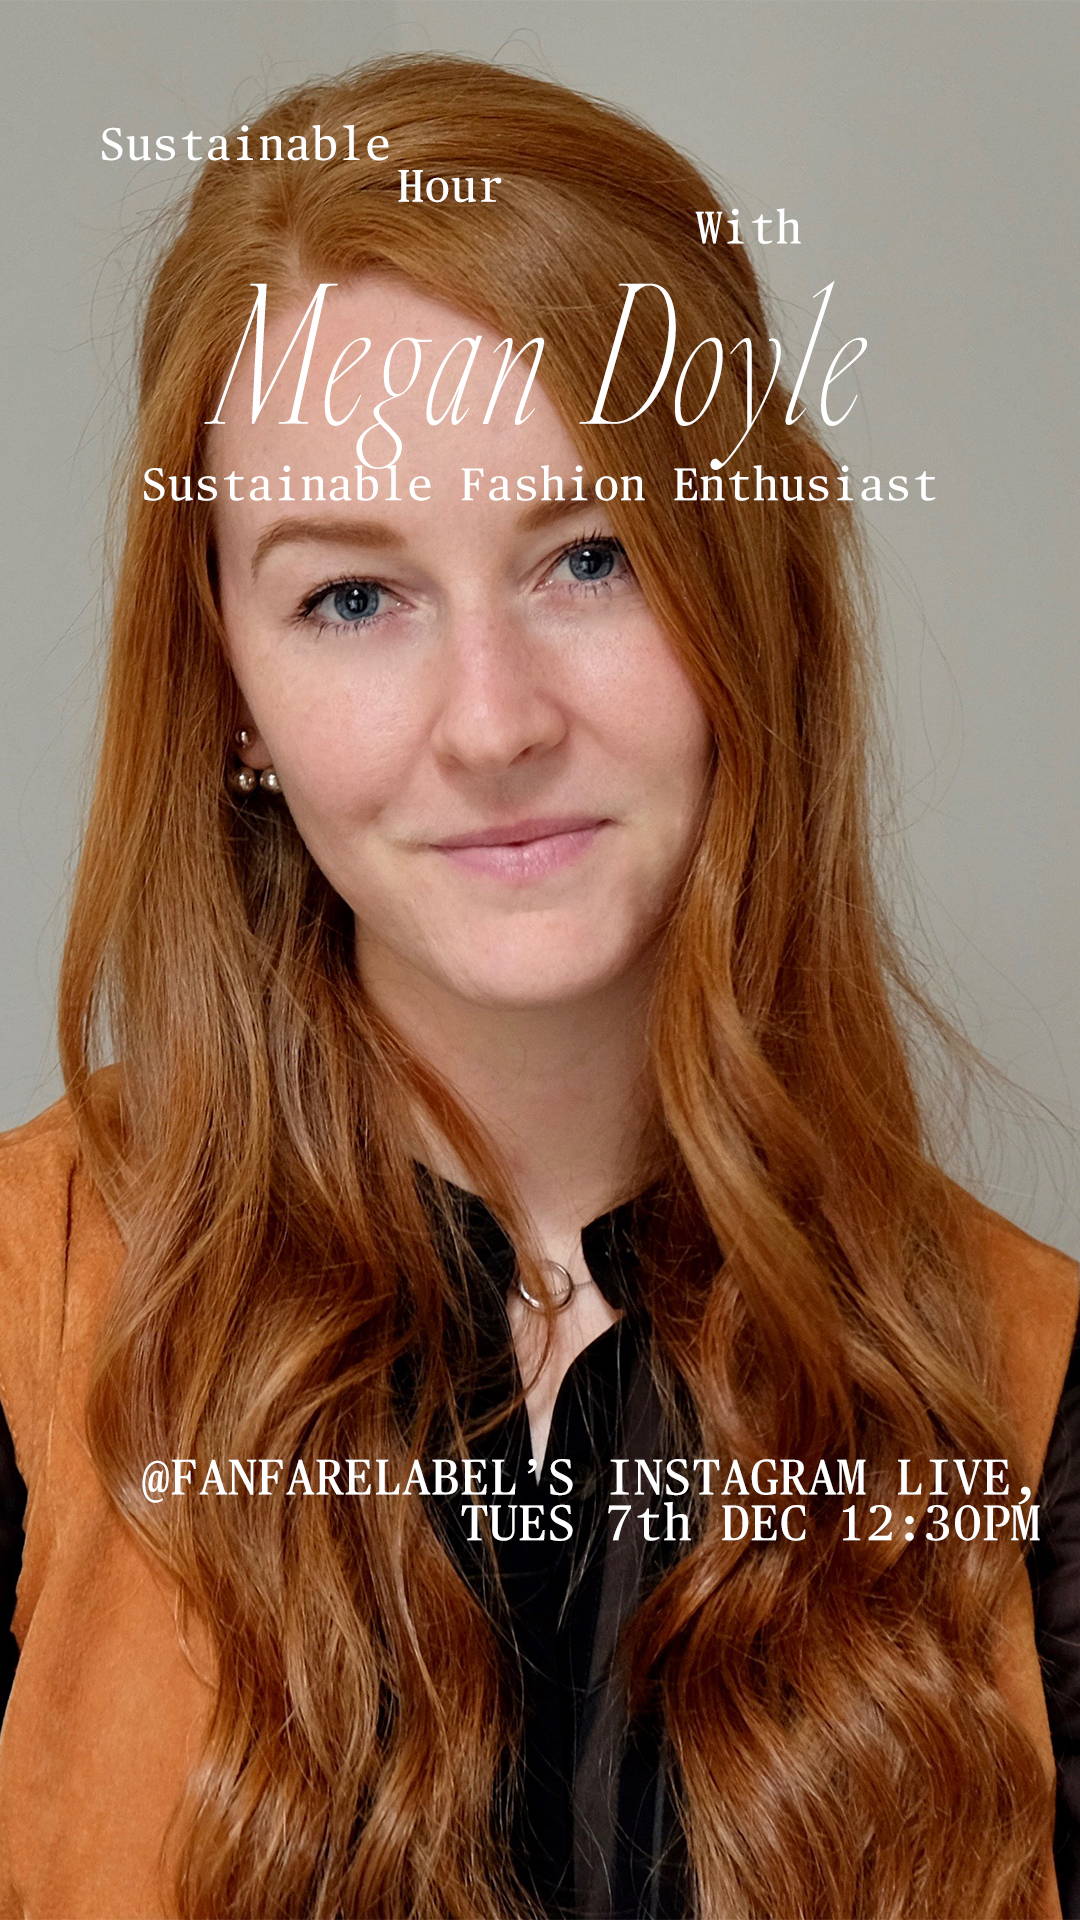 The Sustainable Hour Live Series by Fanfare Label